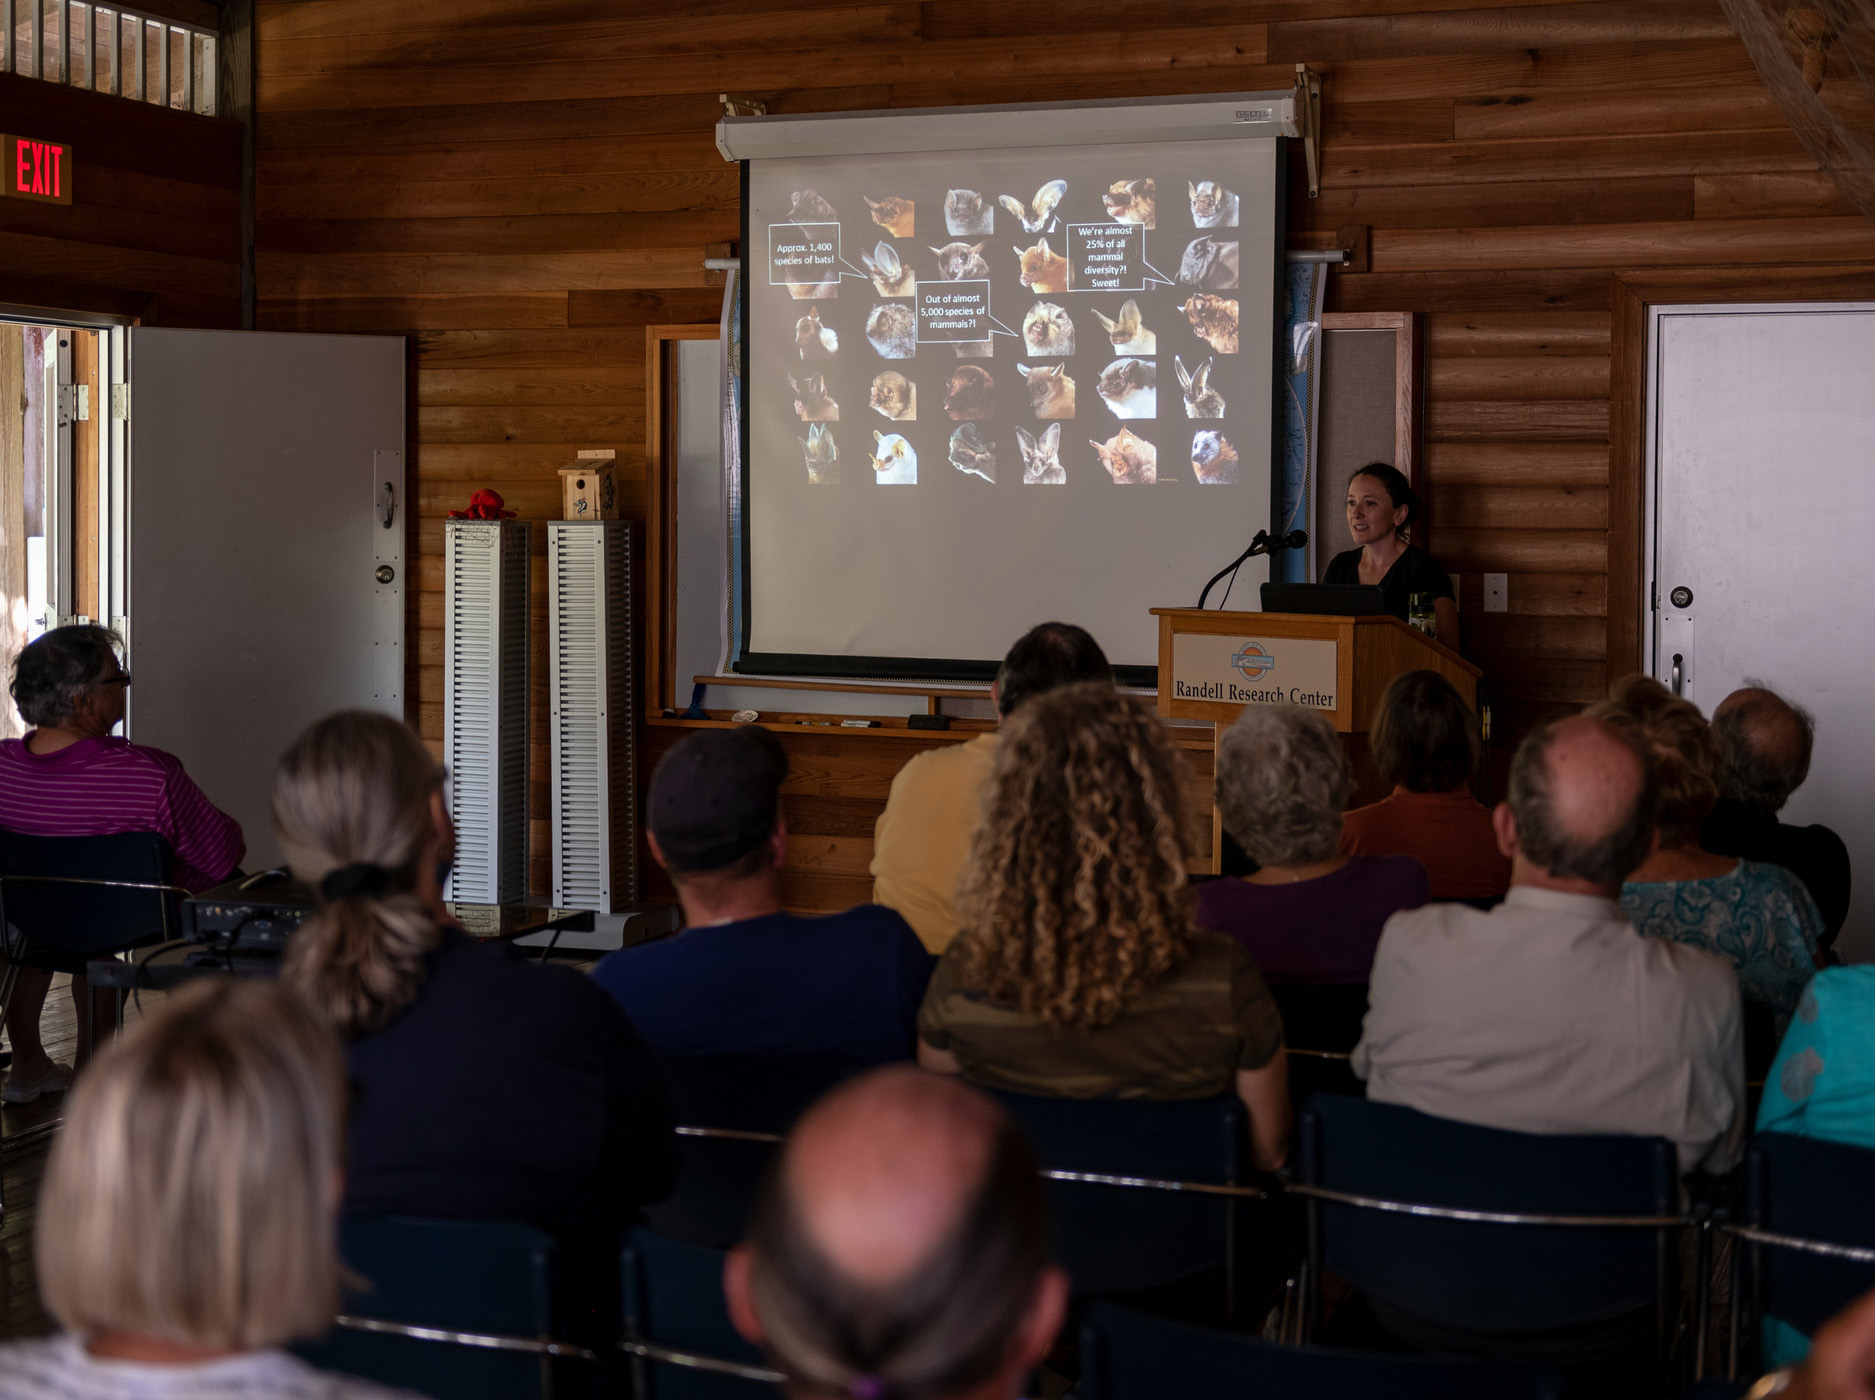 researcher stands behind a podium with a Randell Research Center and speaks to an audience. A projection screen behind her shows many photos of bats.